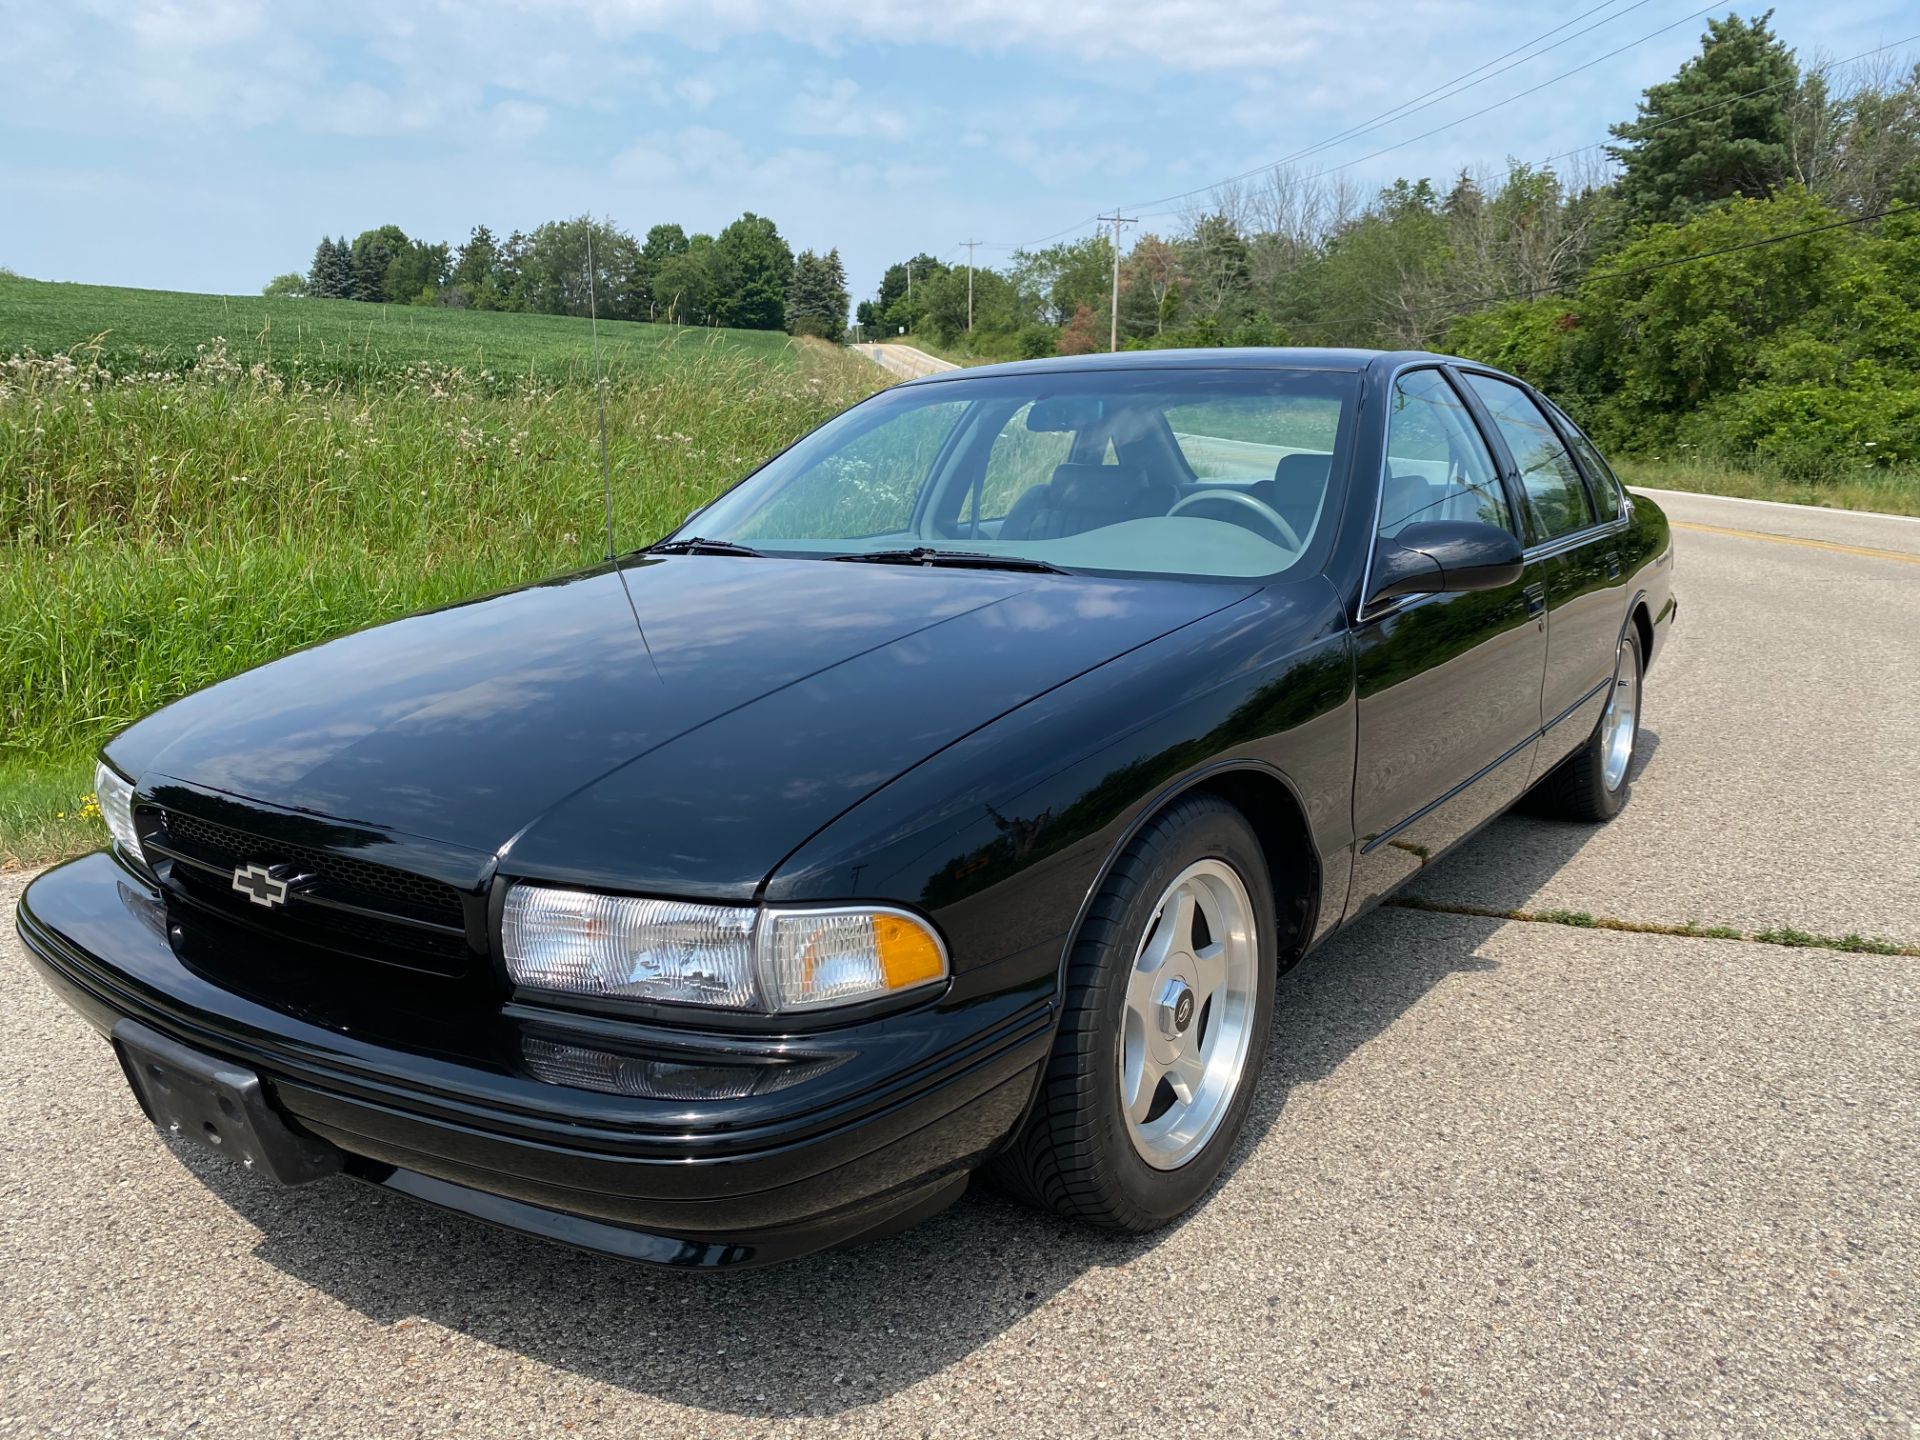 1996 Chevrolet Impala SS in Big Bend, Wisconsin - Photo 51